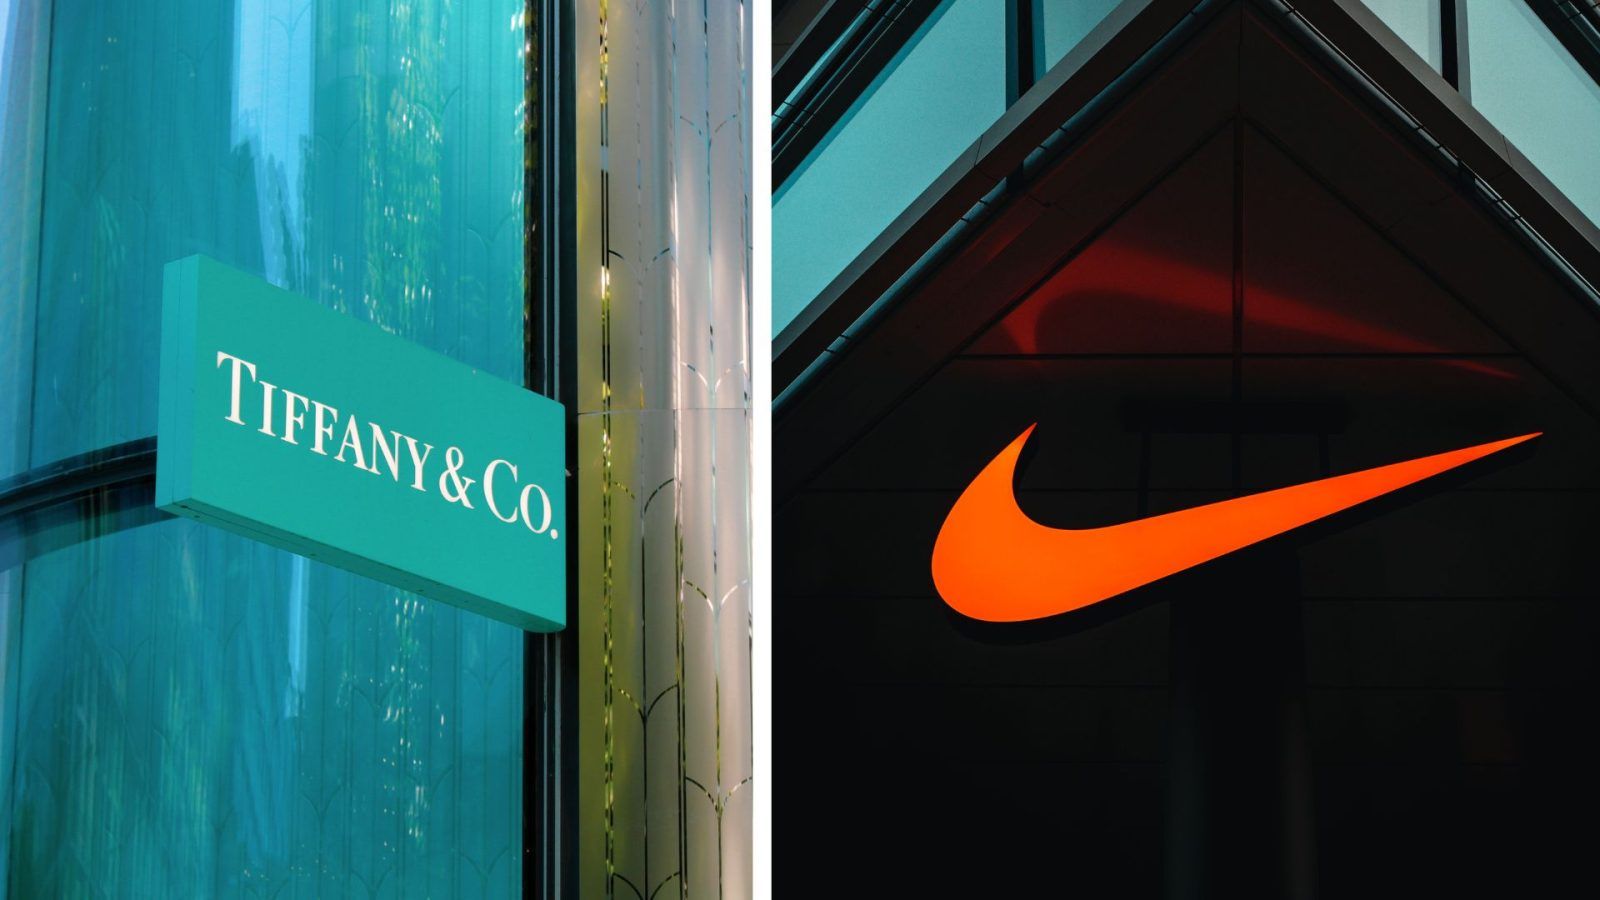 Tiffany & Co. x Nike confirm a 'legendary pair' post collaboration